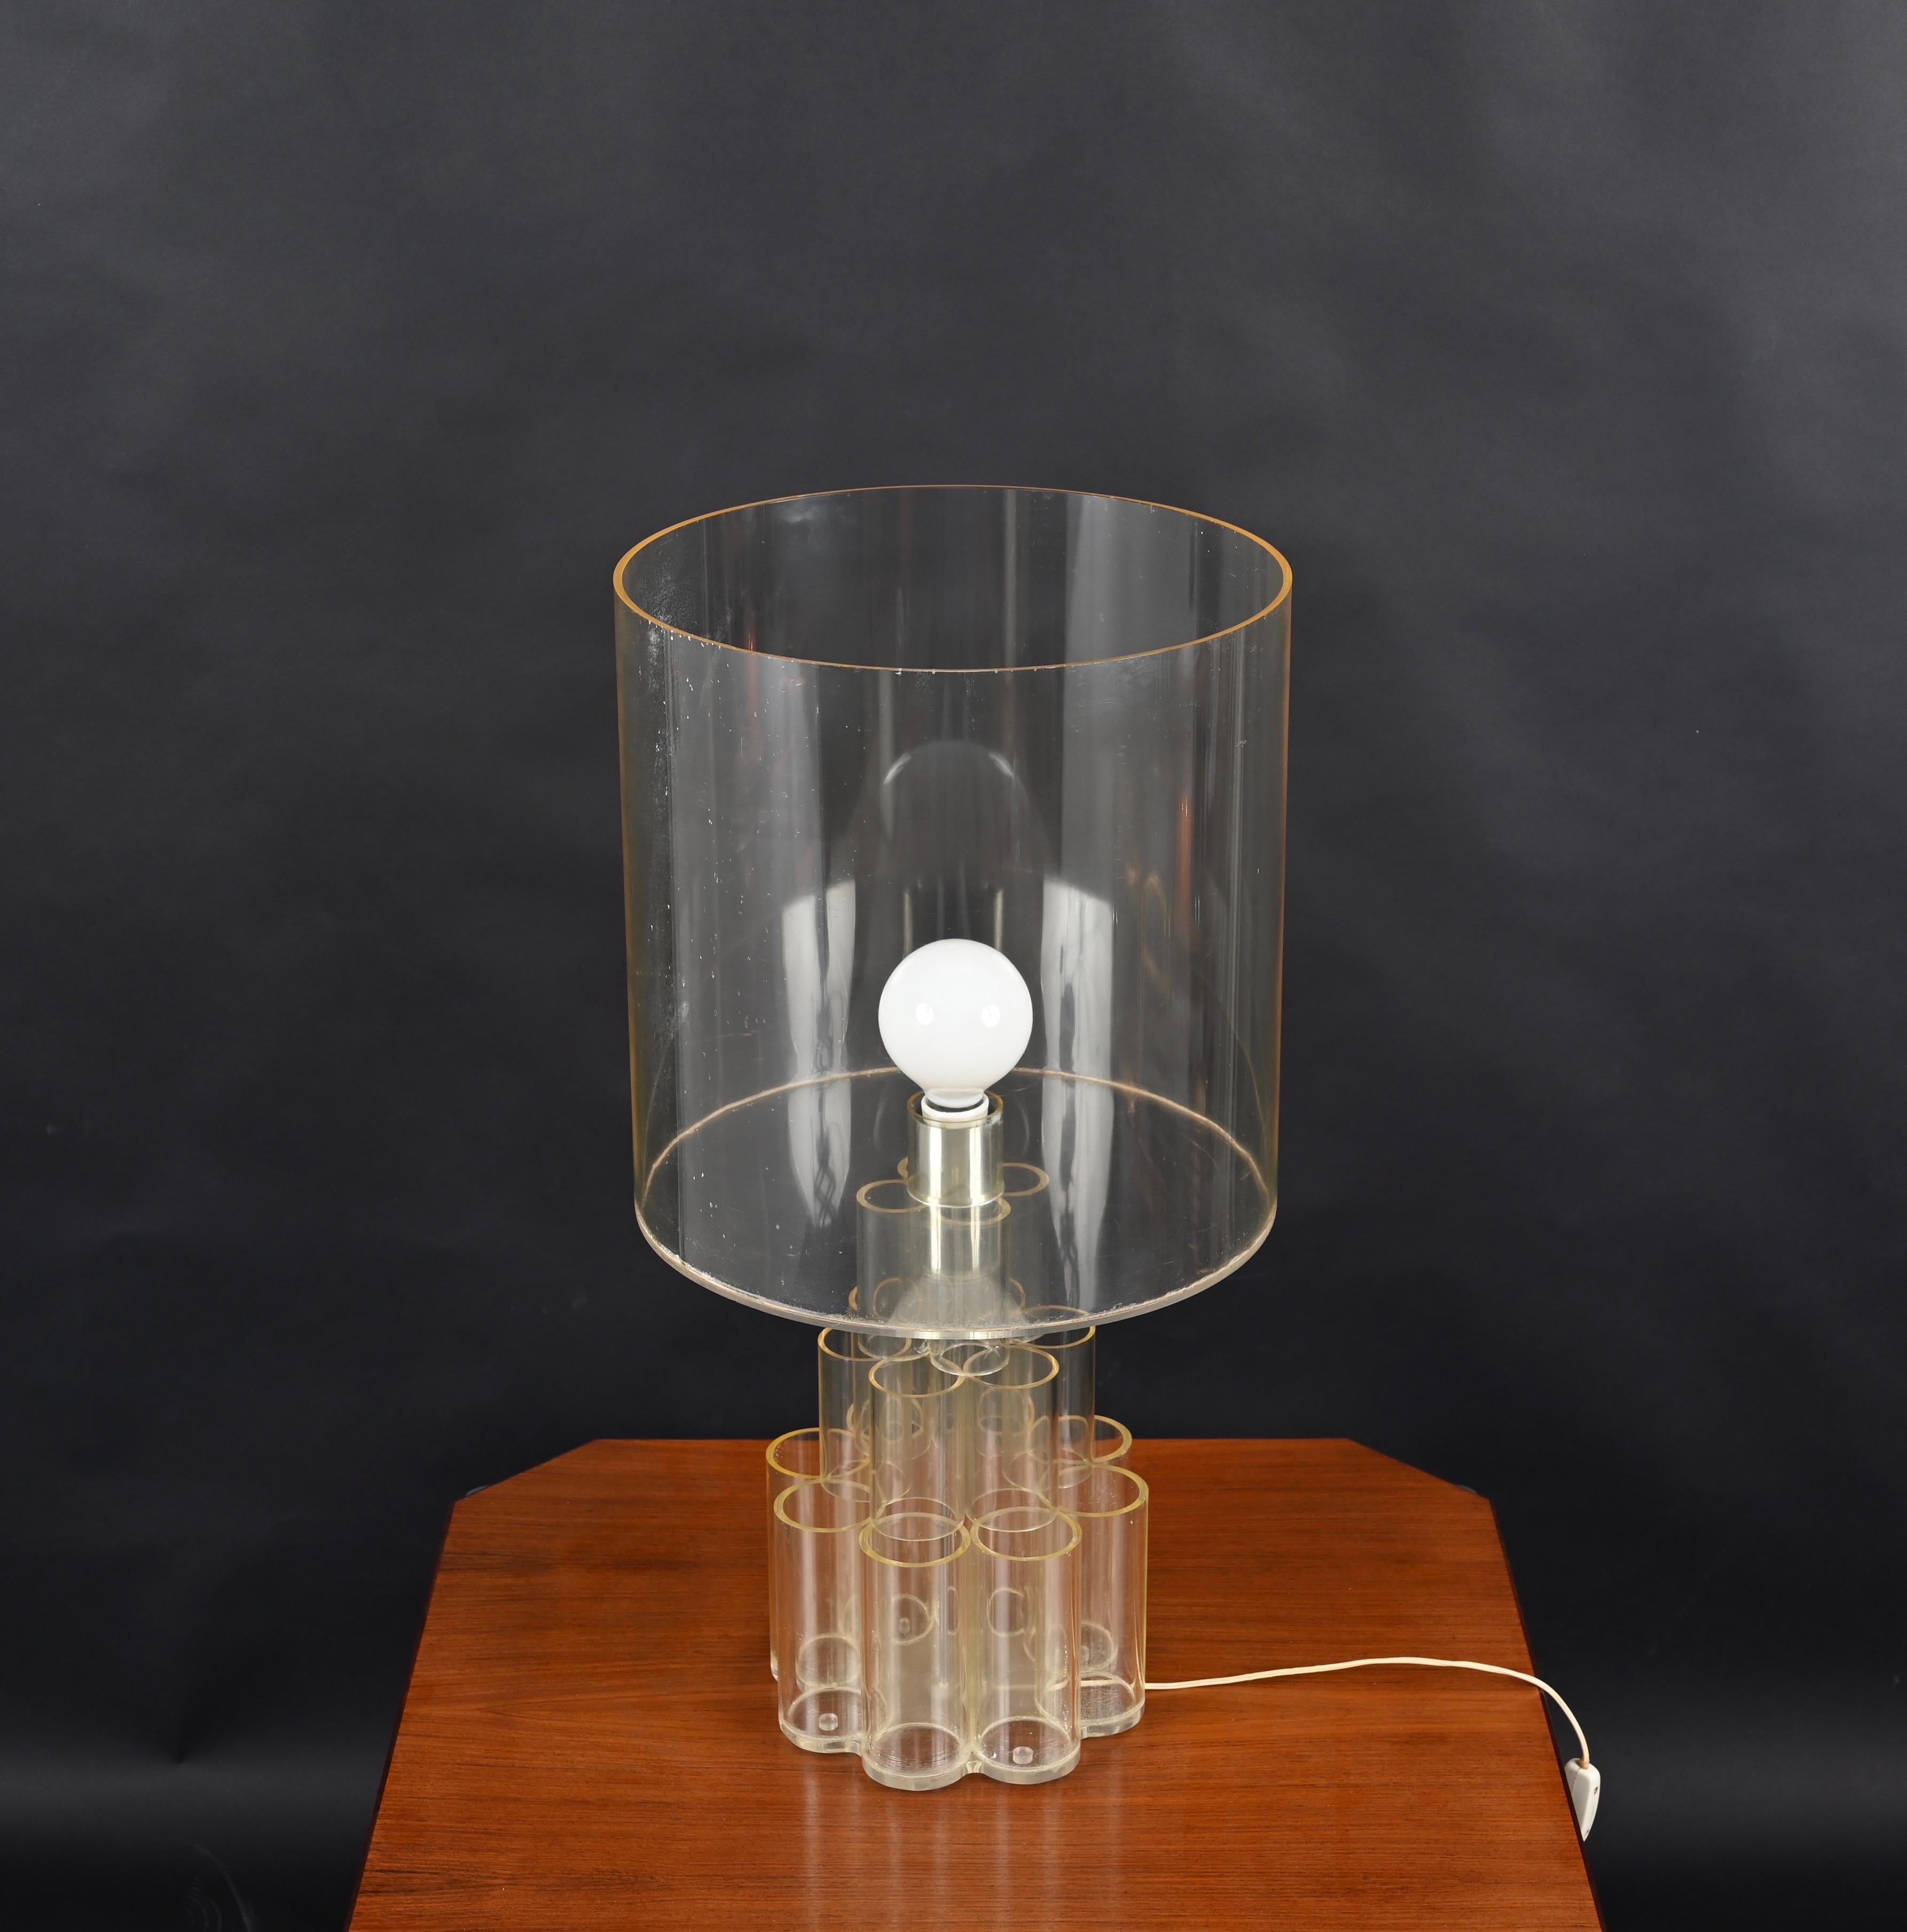 Mid-Century Modern Table Lamp in Lucite Plexiglass, Panton Style, Italy, 1970s For Sale 6